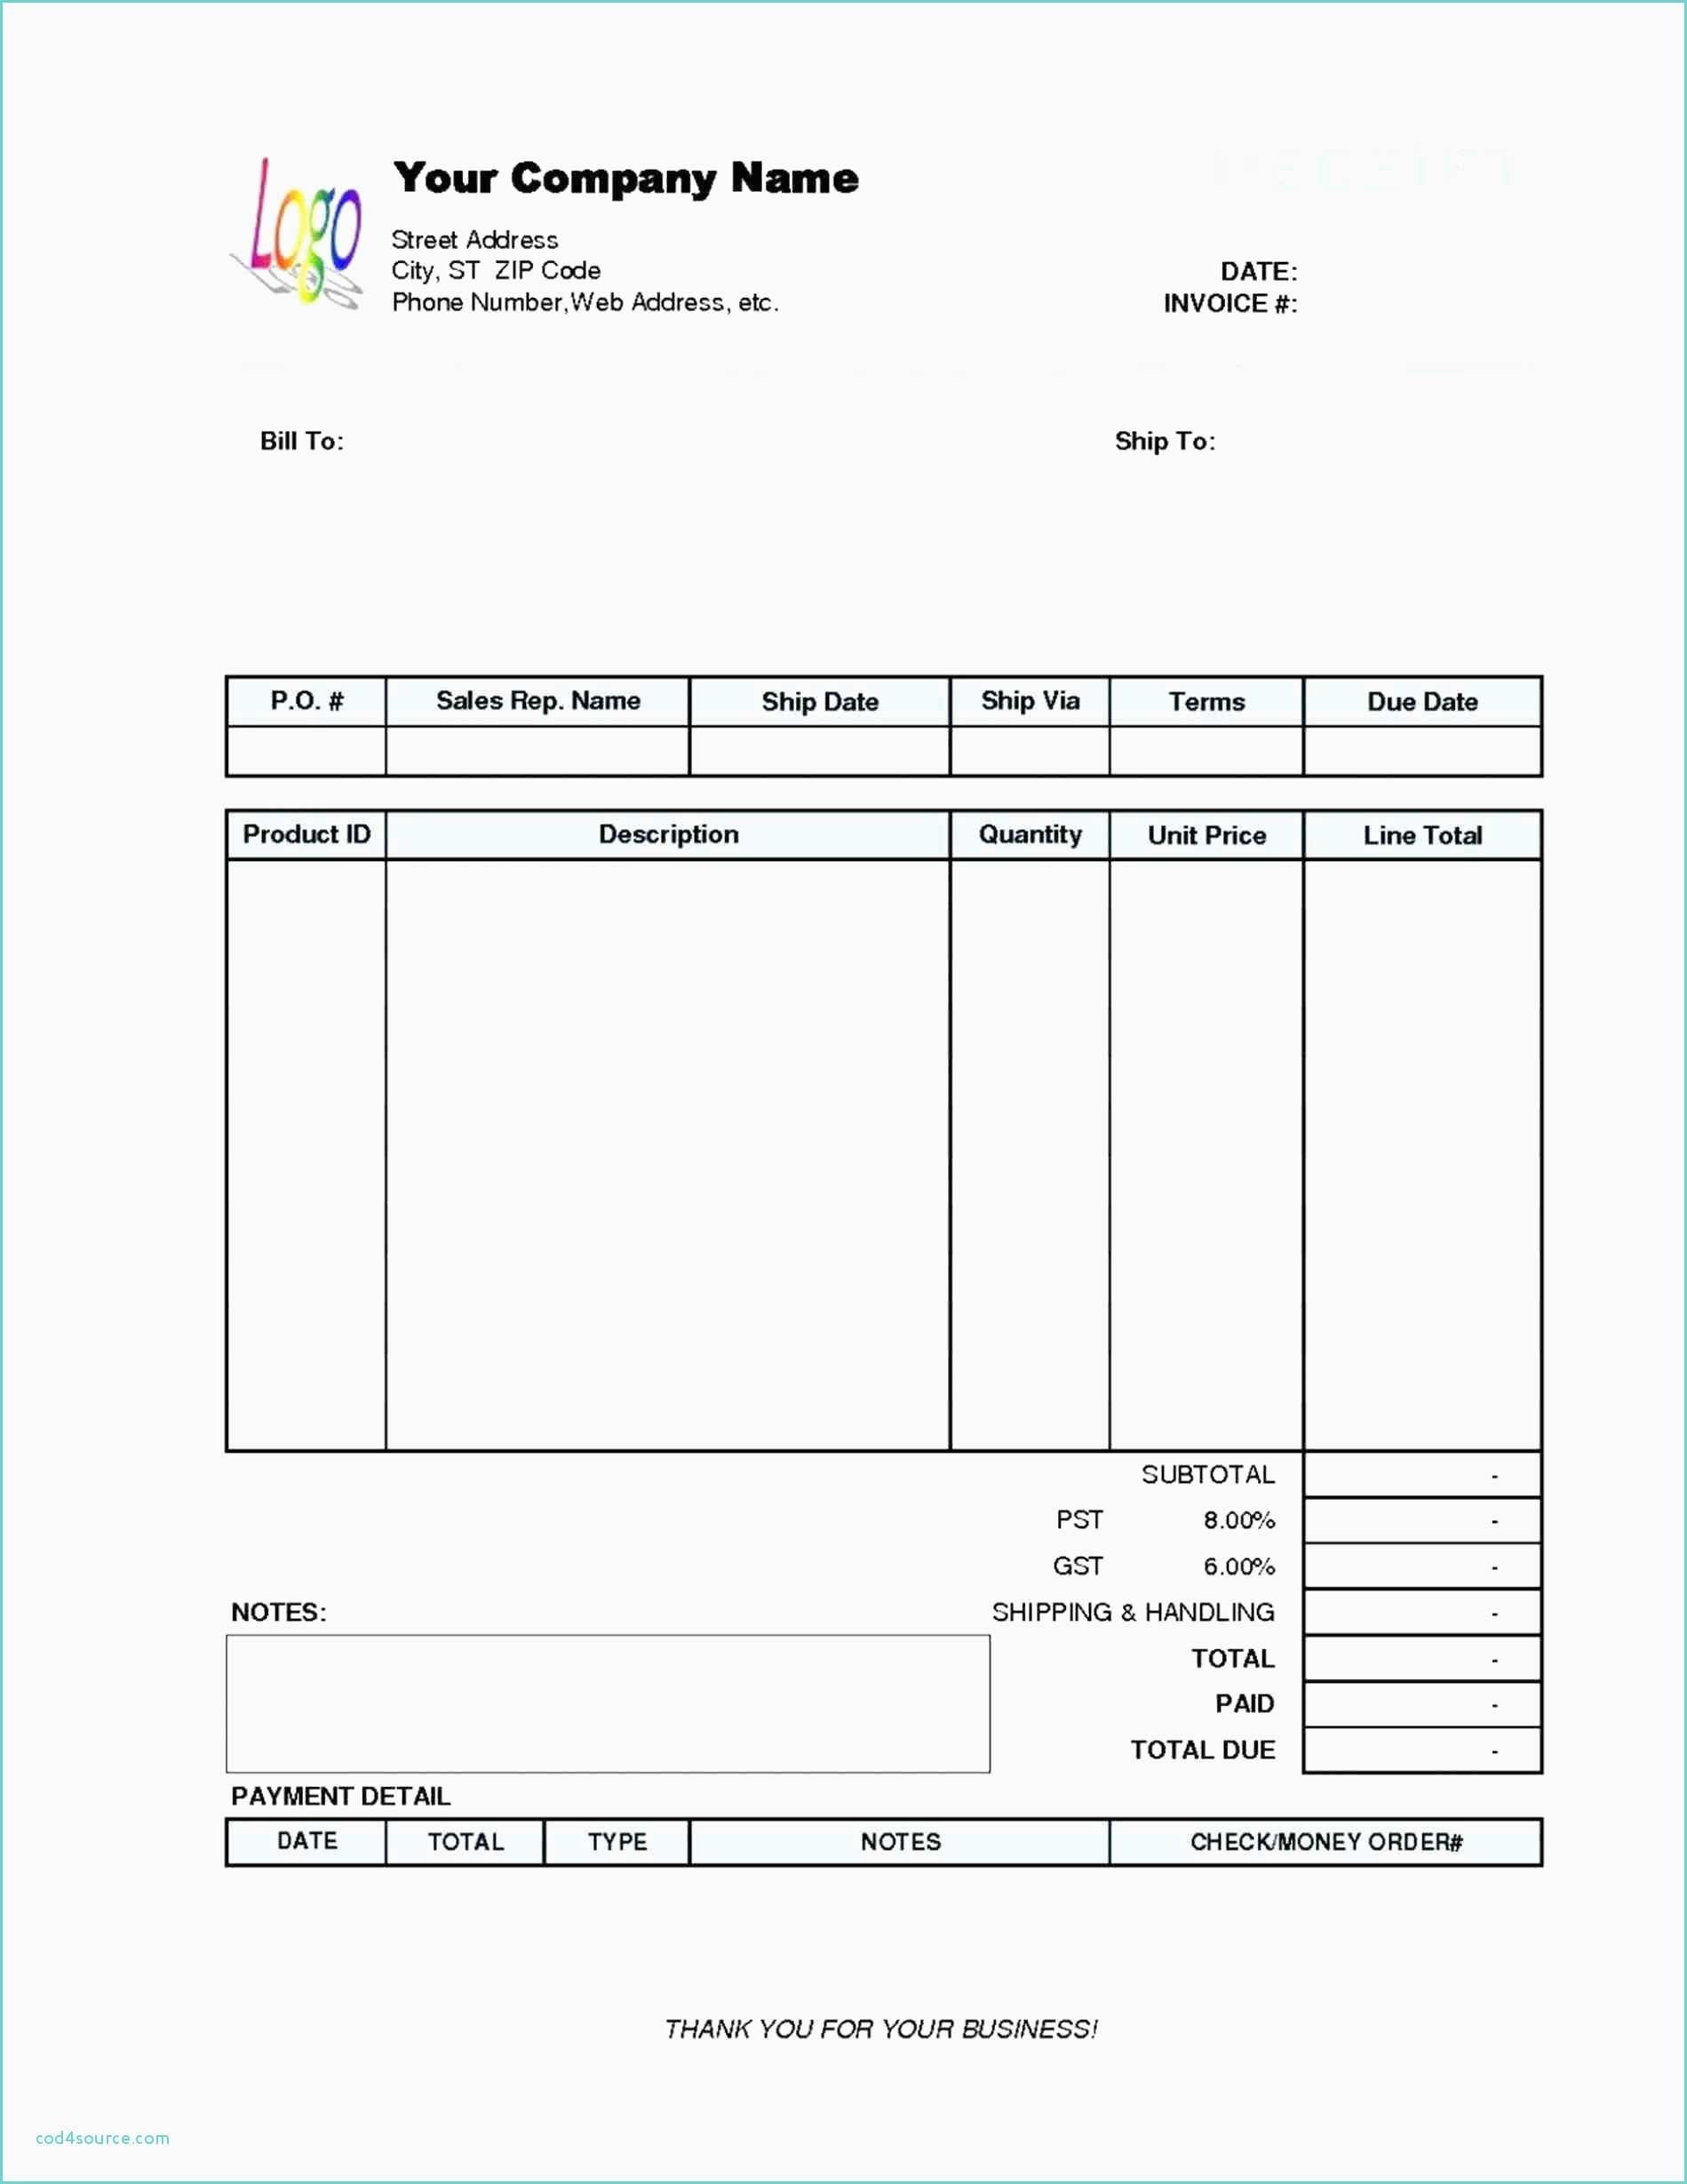 Free Printable Contractor Invoice Best Of Free Printable Checks - Free Printable Checks